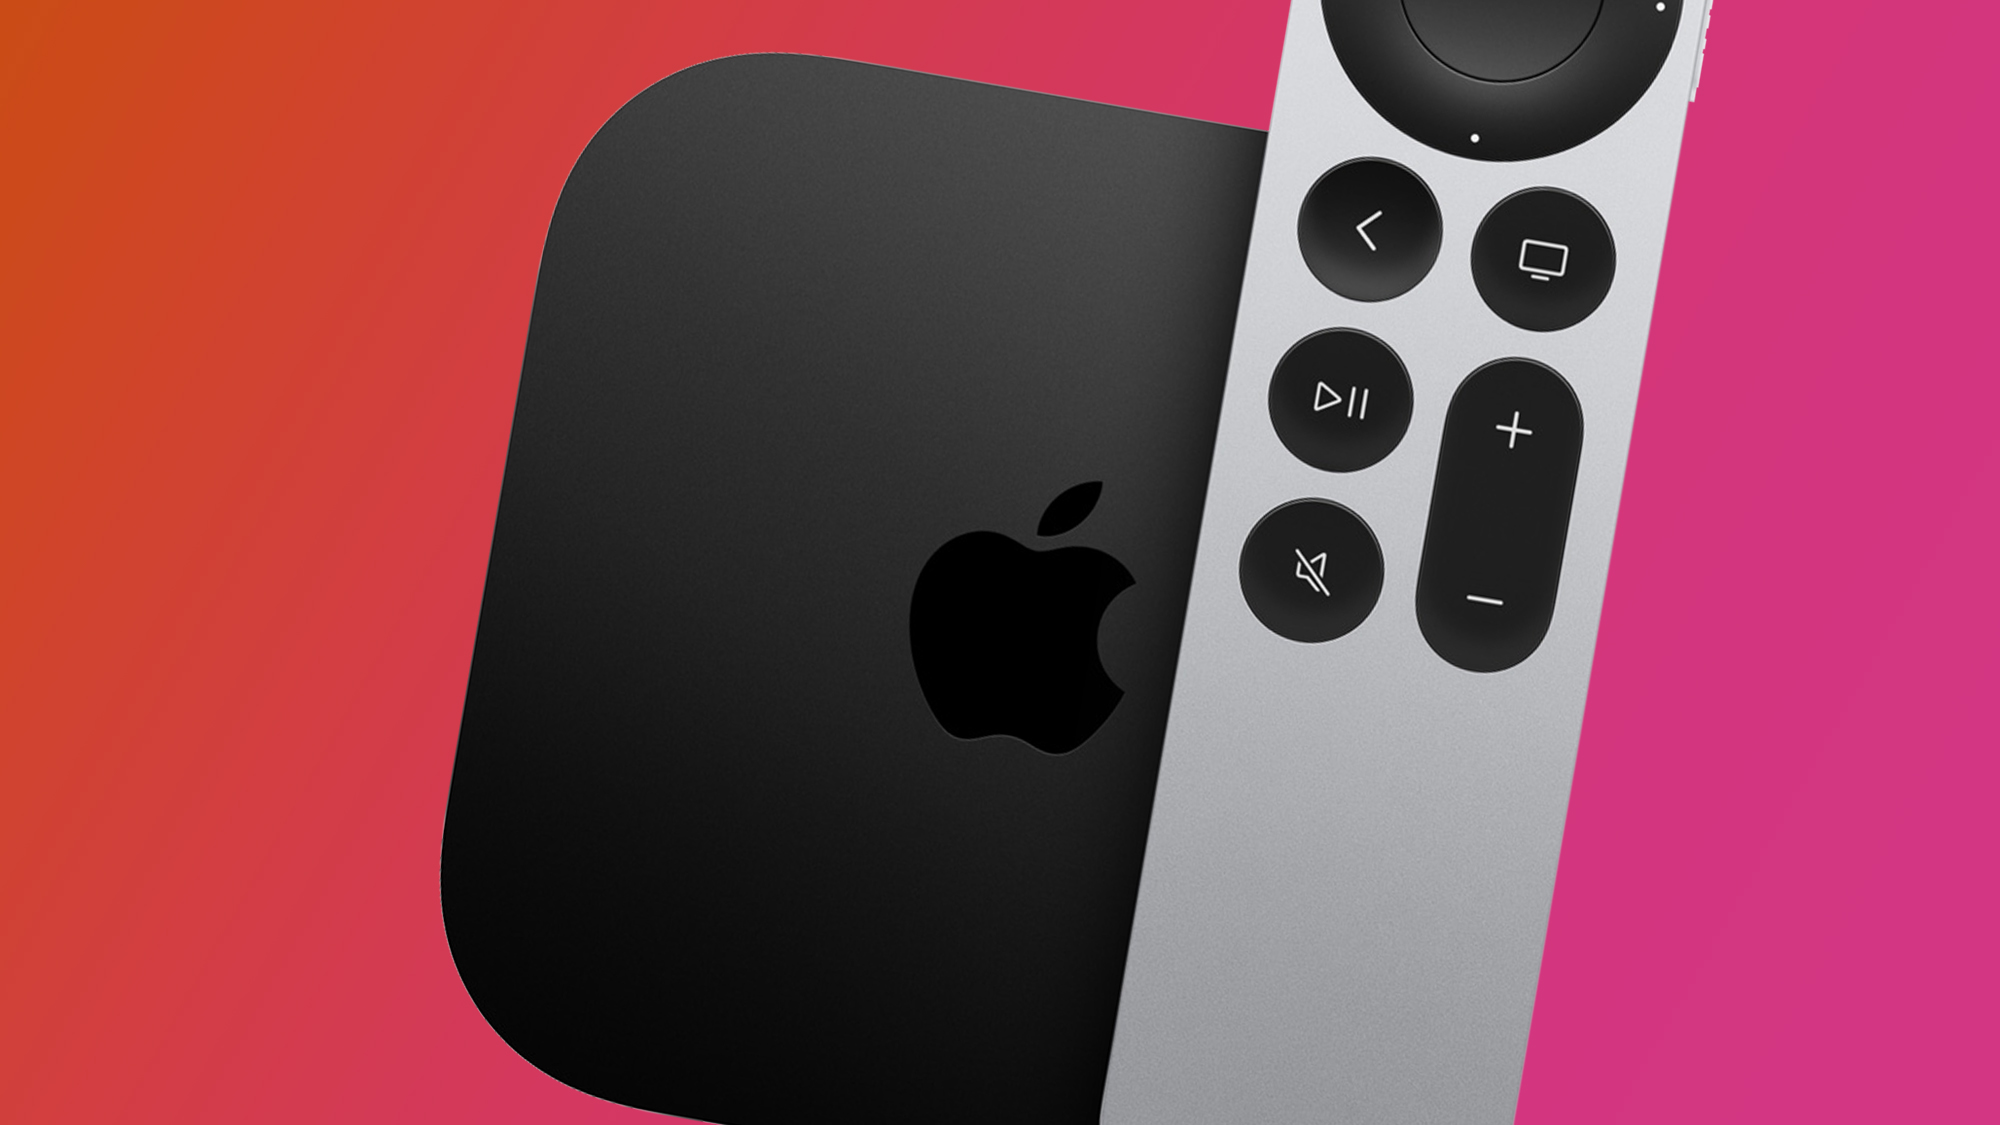 A new Apple TV 4K won’t land this month, according to new rumors – and that’s a missed opportunity